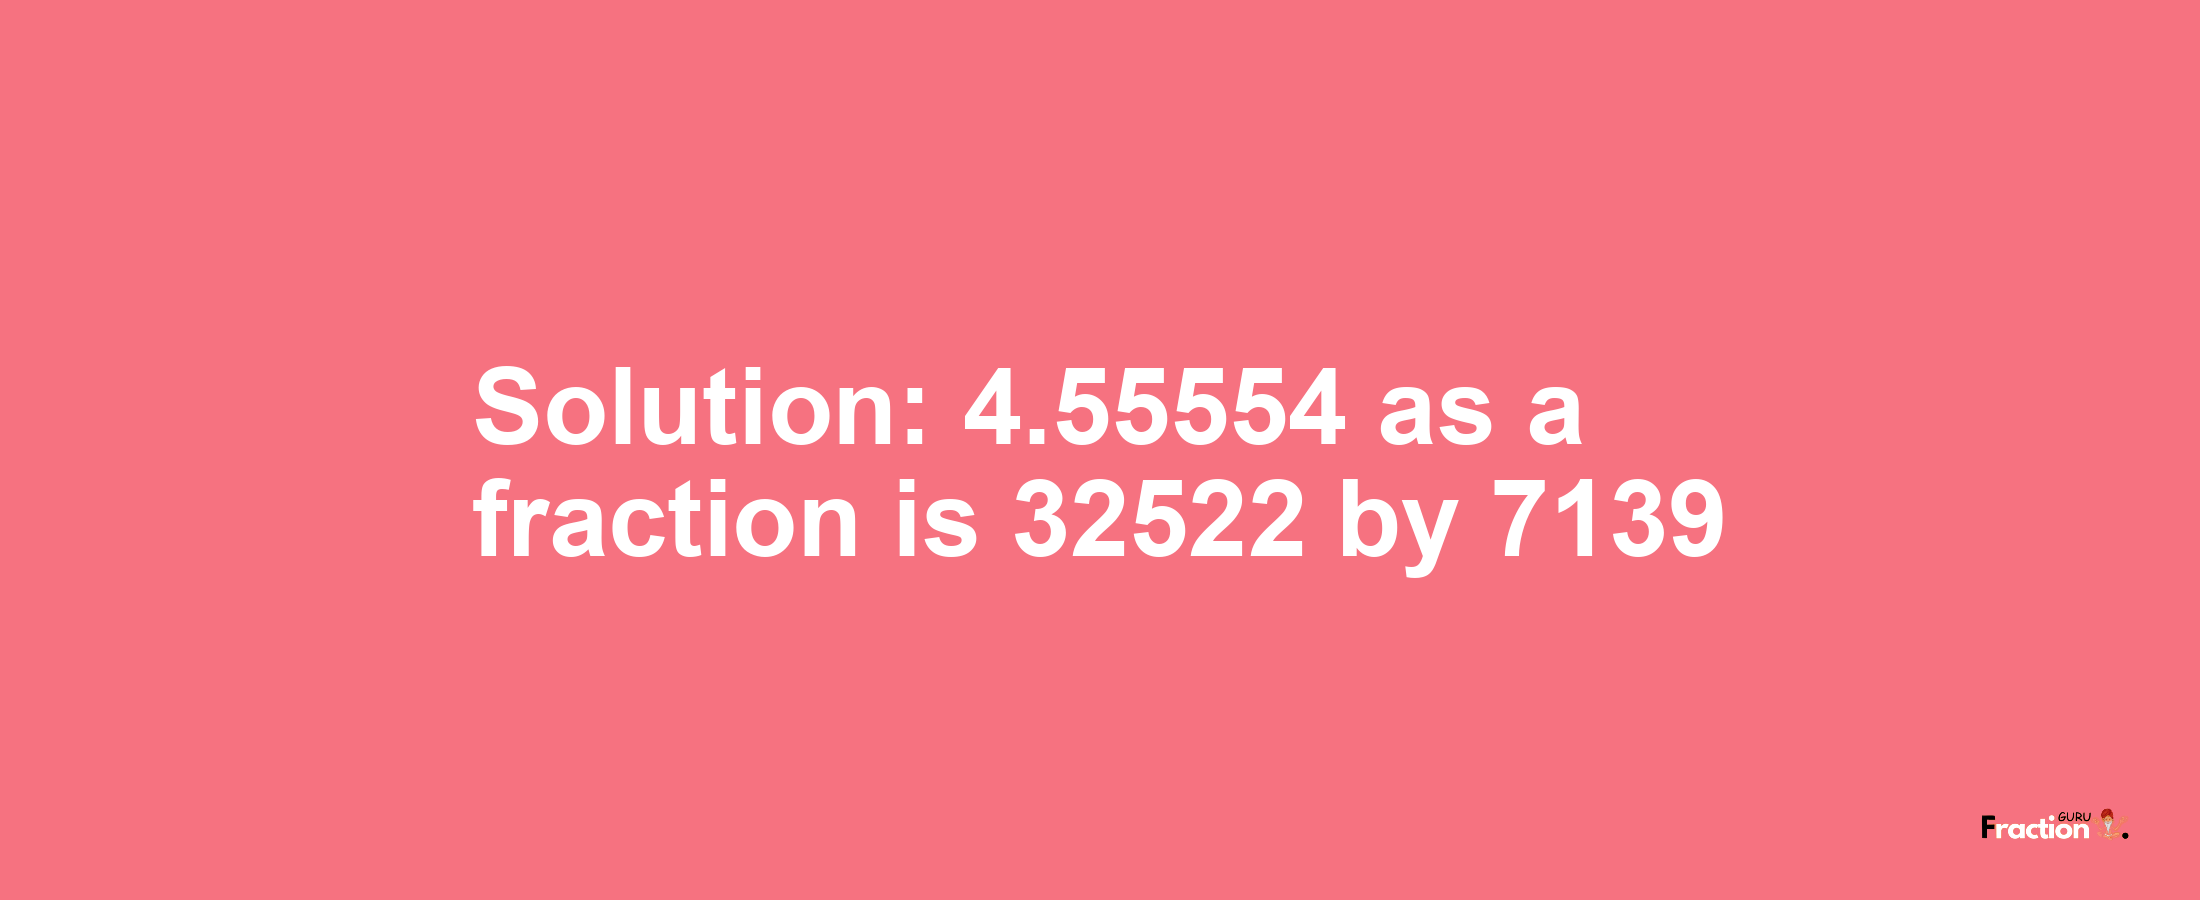 Solution:4.55554 as a fraction is 32522/7139